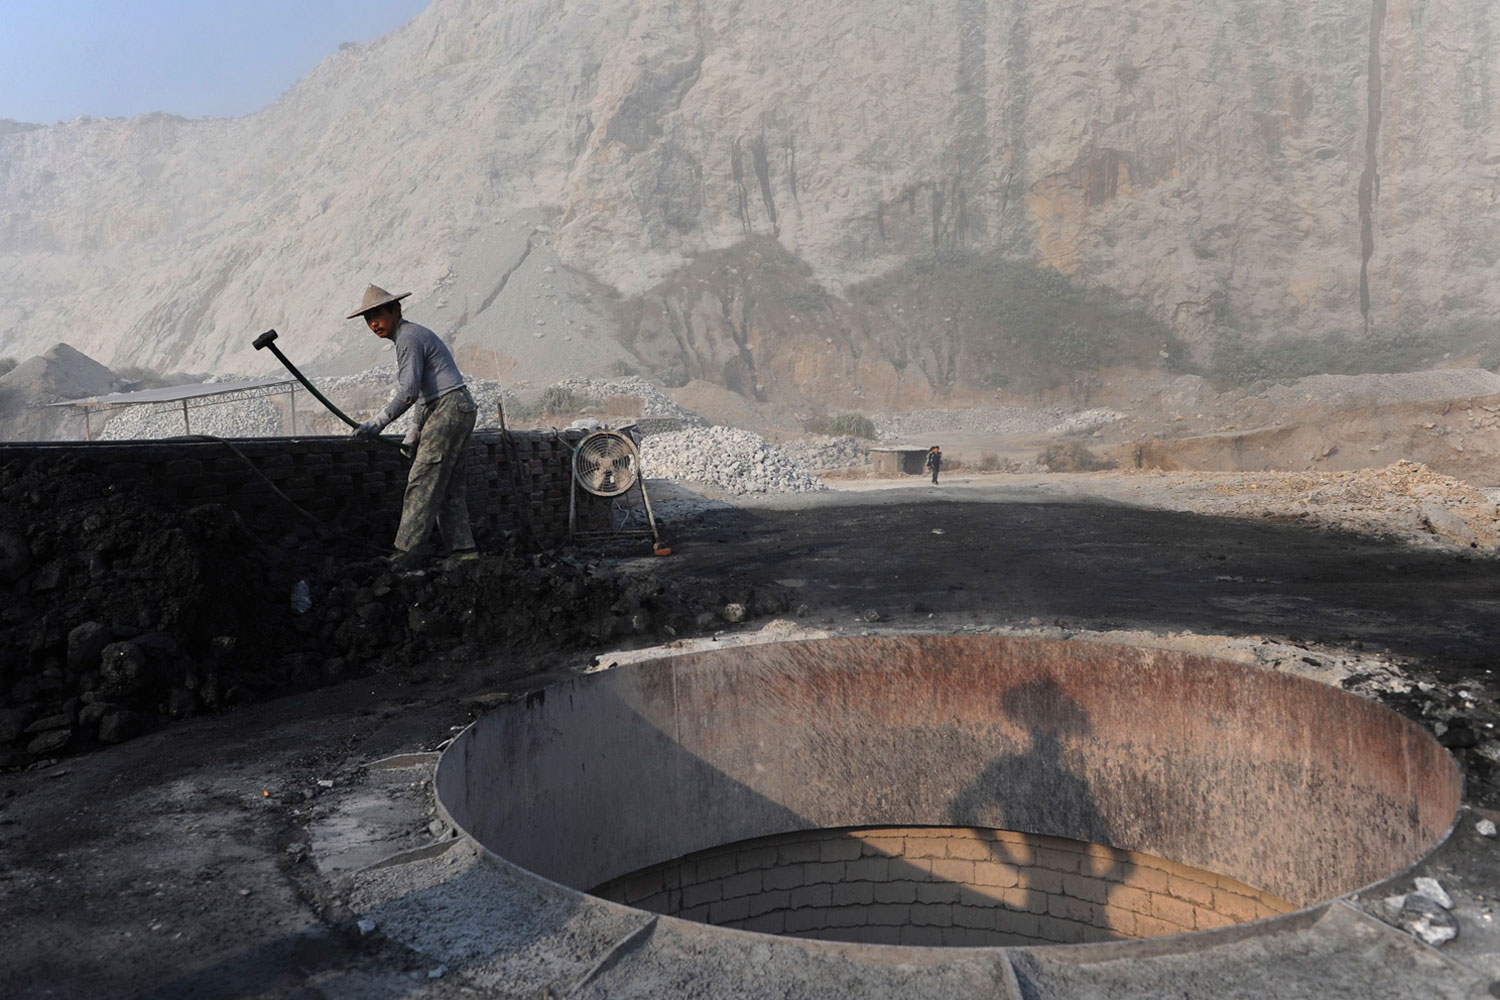 Oct.12, 2012. A worker smashes coal as he prepares to burn limestone at a nearby furnace inside a limestone mine in Quzhou, Zhejiang province, China.